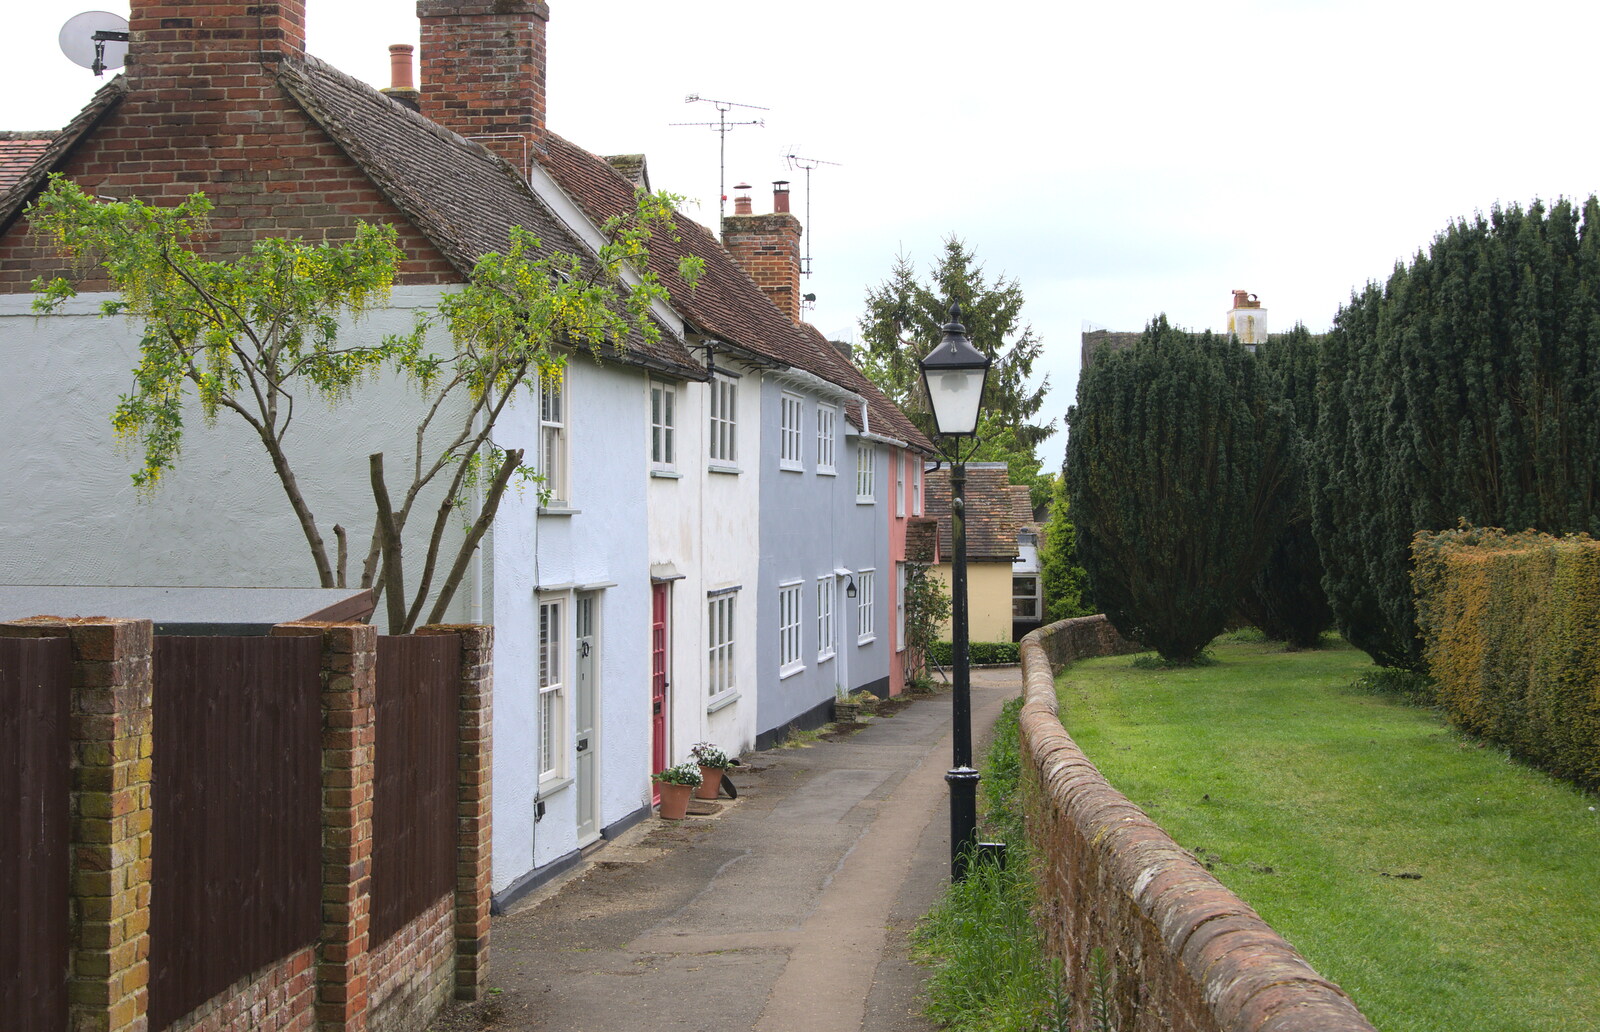 Wandering down Almshouses from A Postcard From Thaxted, Essex - 7th May 2017